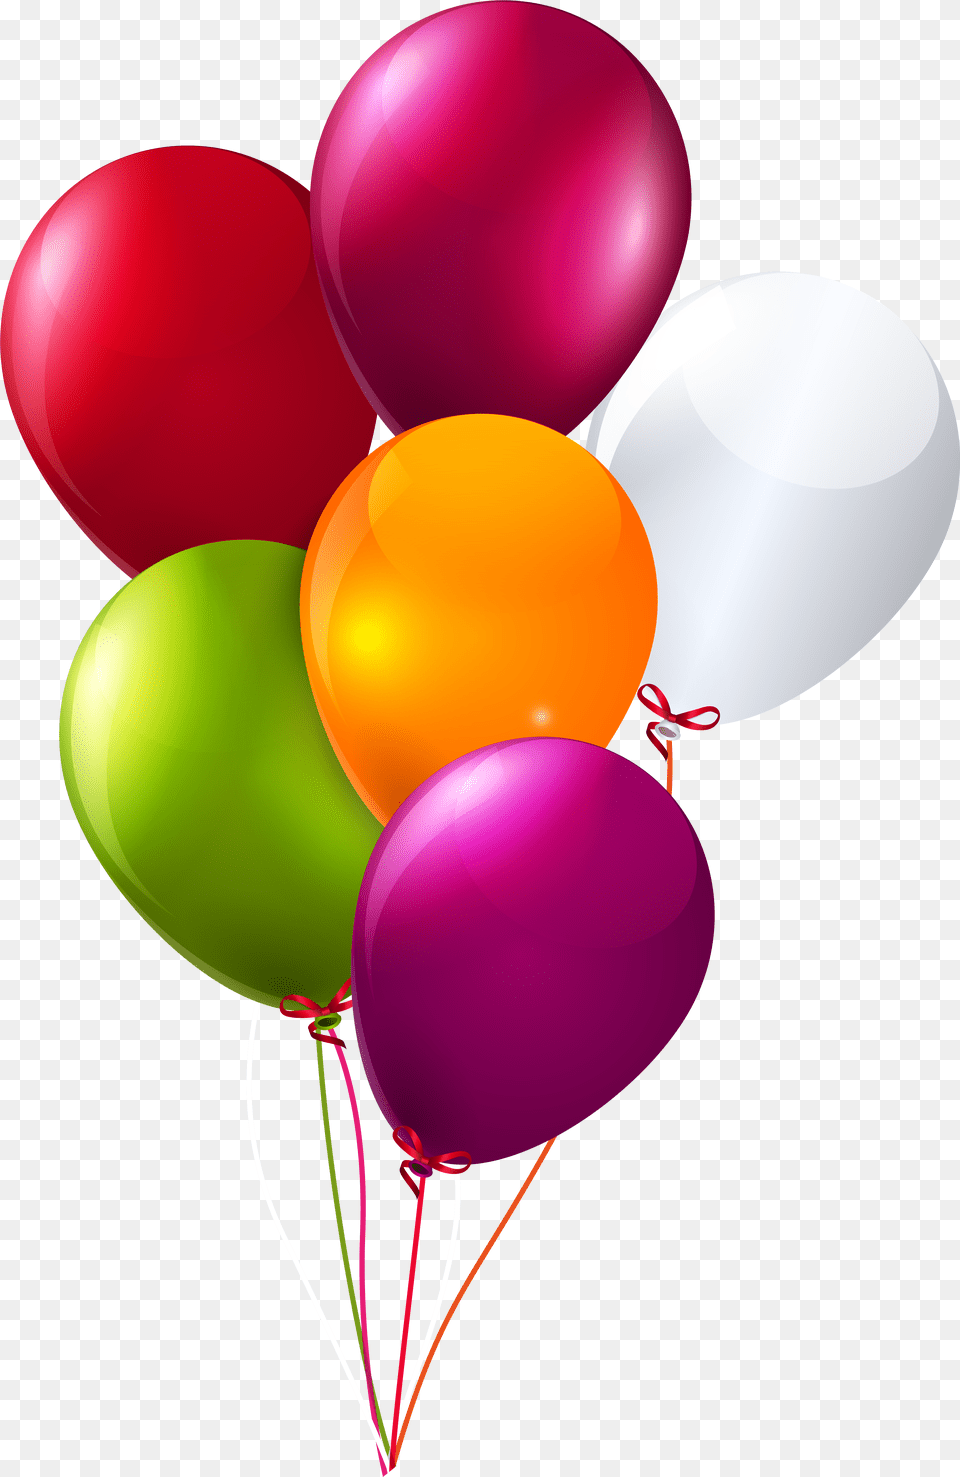 Colorful Bunch Of Balloons Clipart Image Birthday Balloons Clipart, Balloon Png